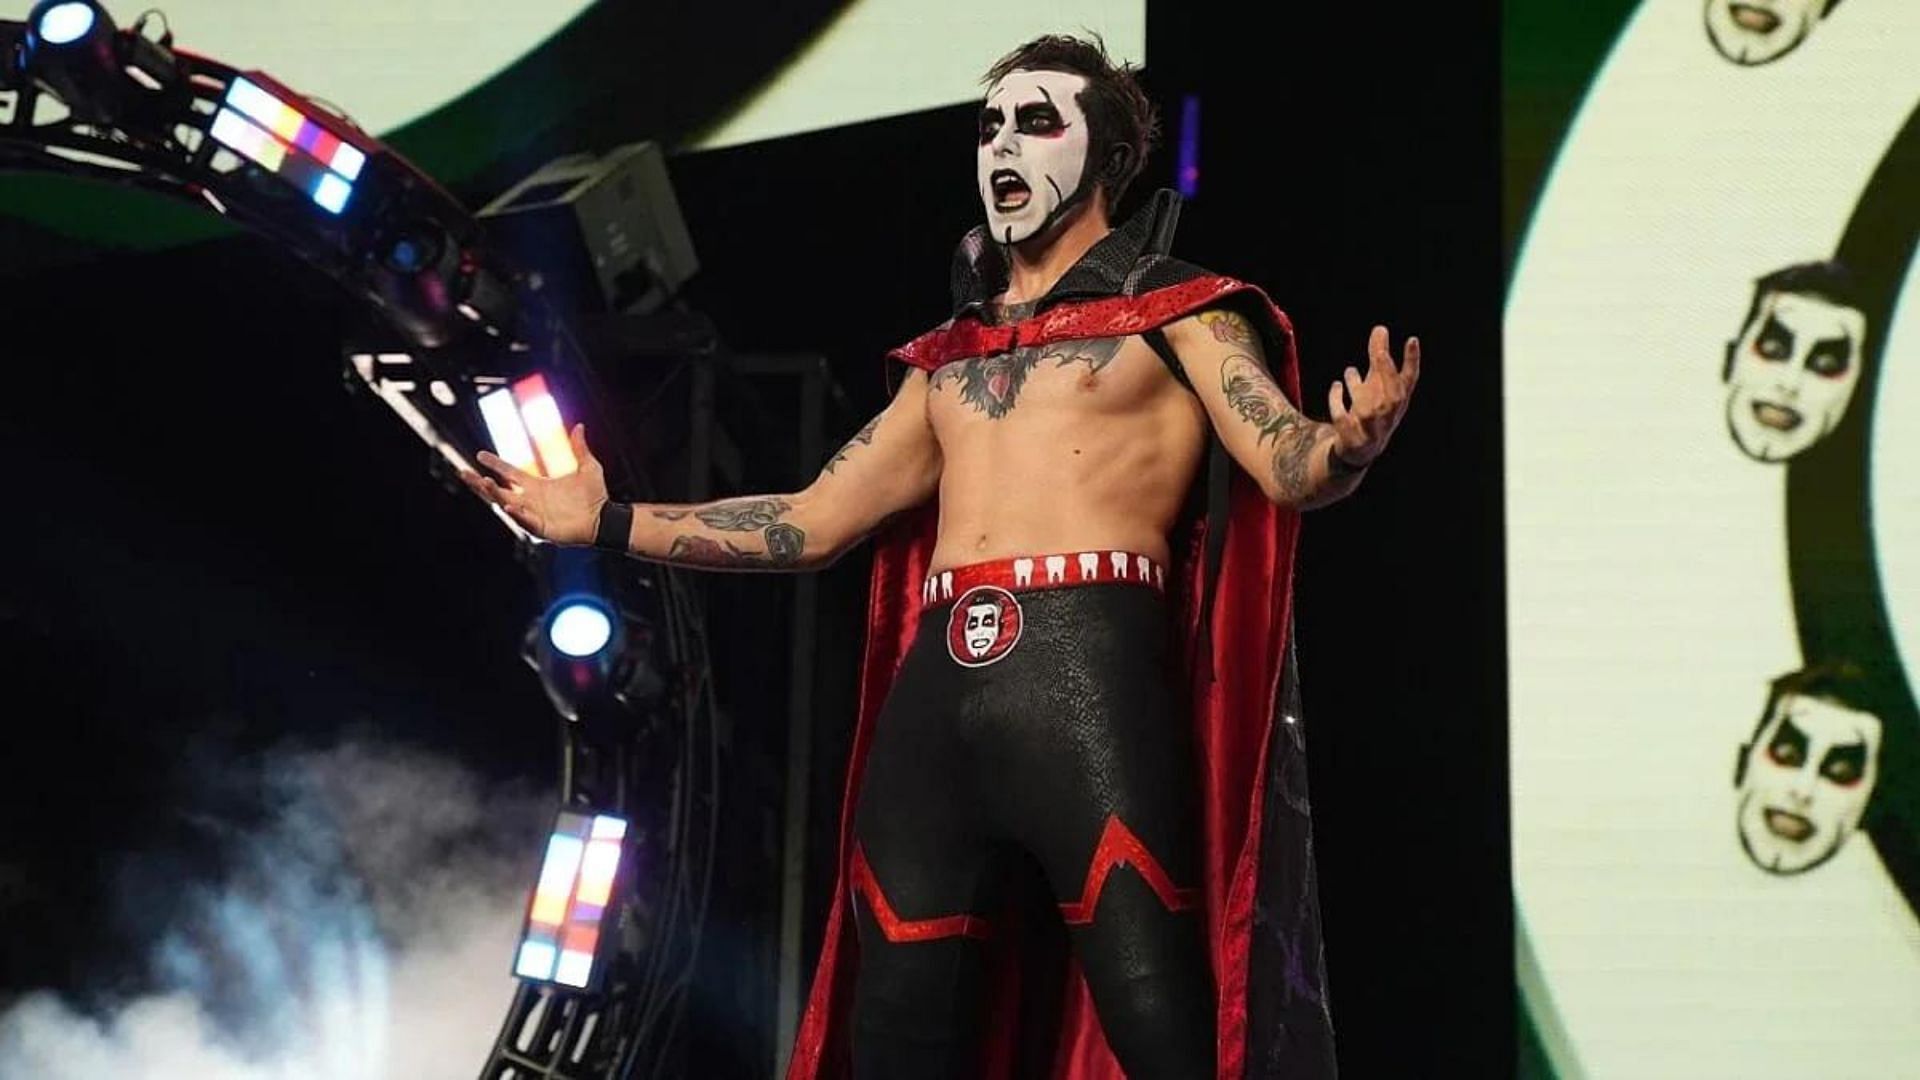 Danhausen is an AEW star who has been out of action since March